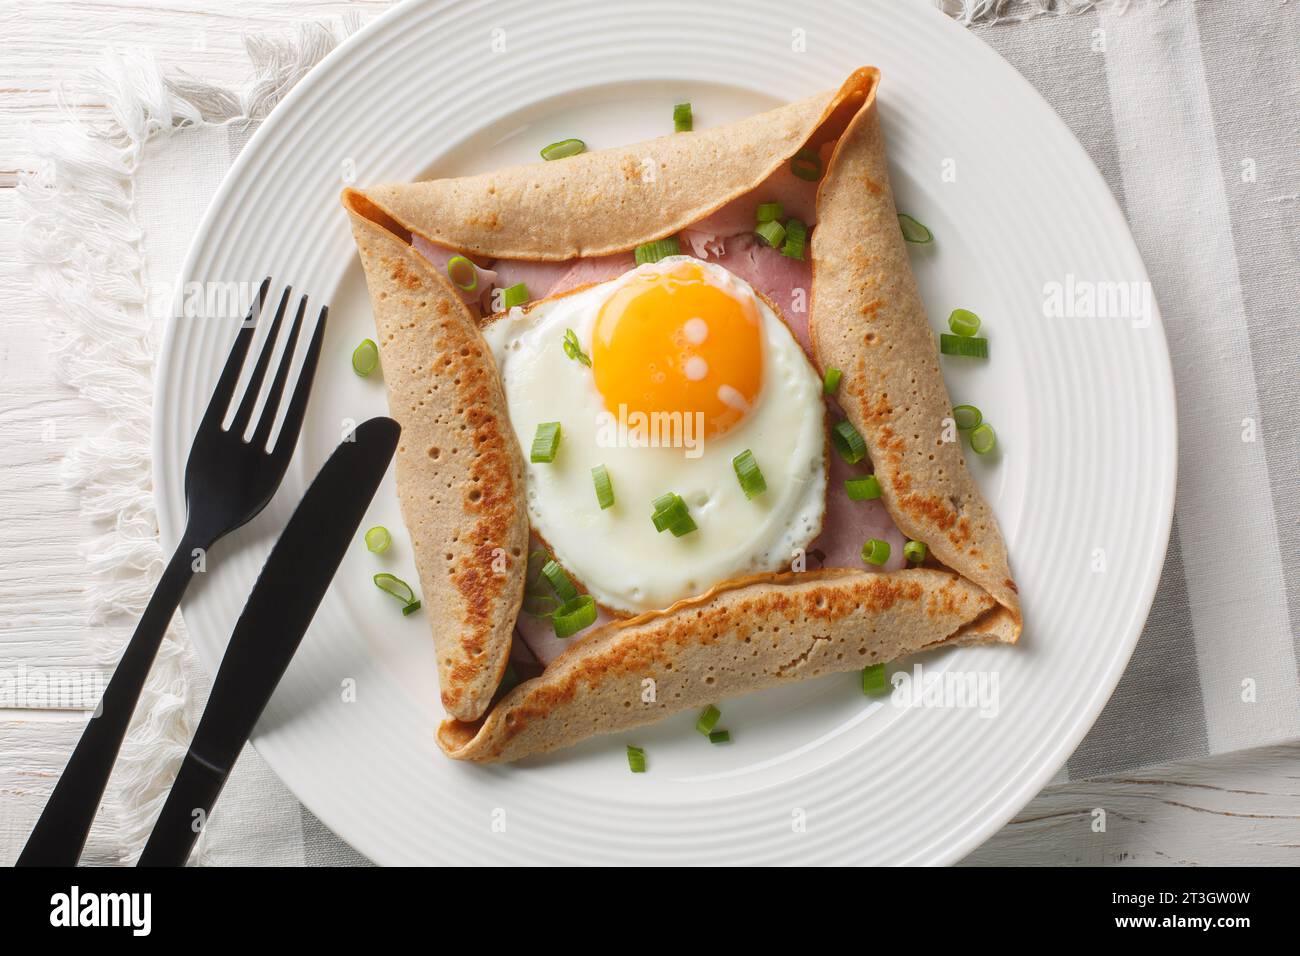 Breton galette, galette sarrasin, buckwheat crepe, with fried egg, cheese, ham closeup on the plate on the table. Horizontal top view from above Stock Photo